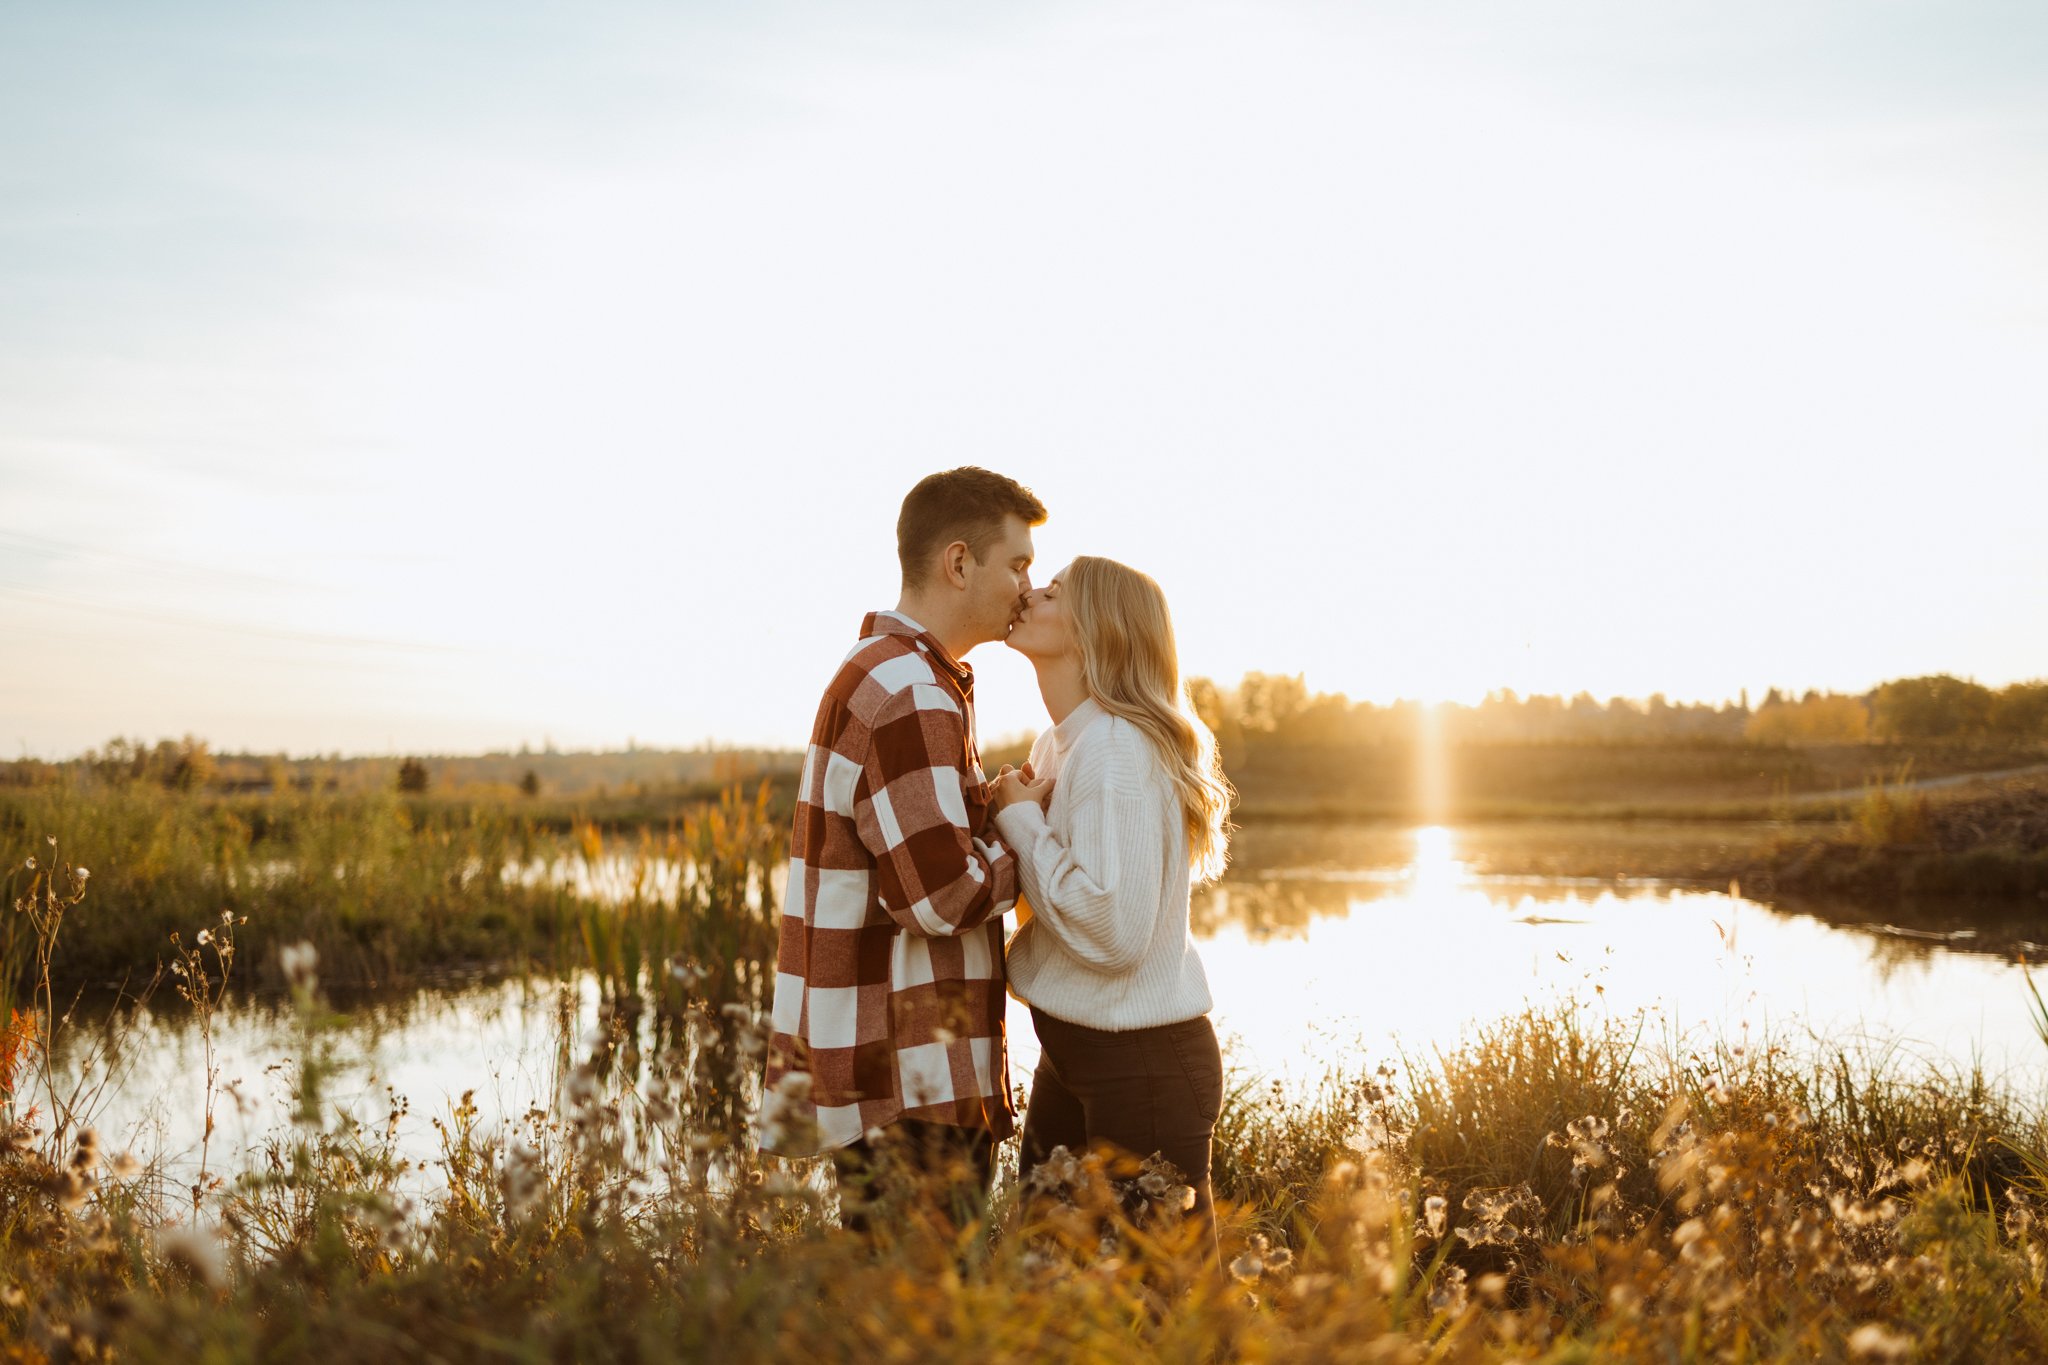 Calgary-wedding-photographer-love-and-be-loved-photography-Matthew-Kyra-Fish-Creek-Park-Fall-Engagement-Session-38.jpg